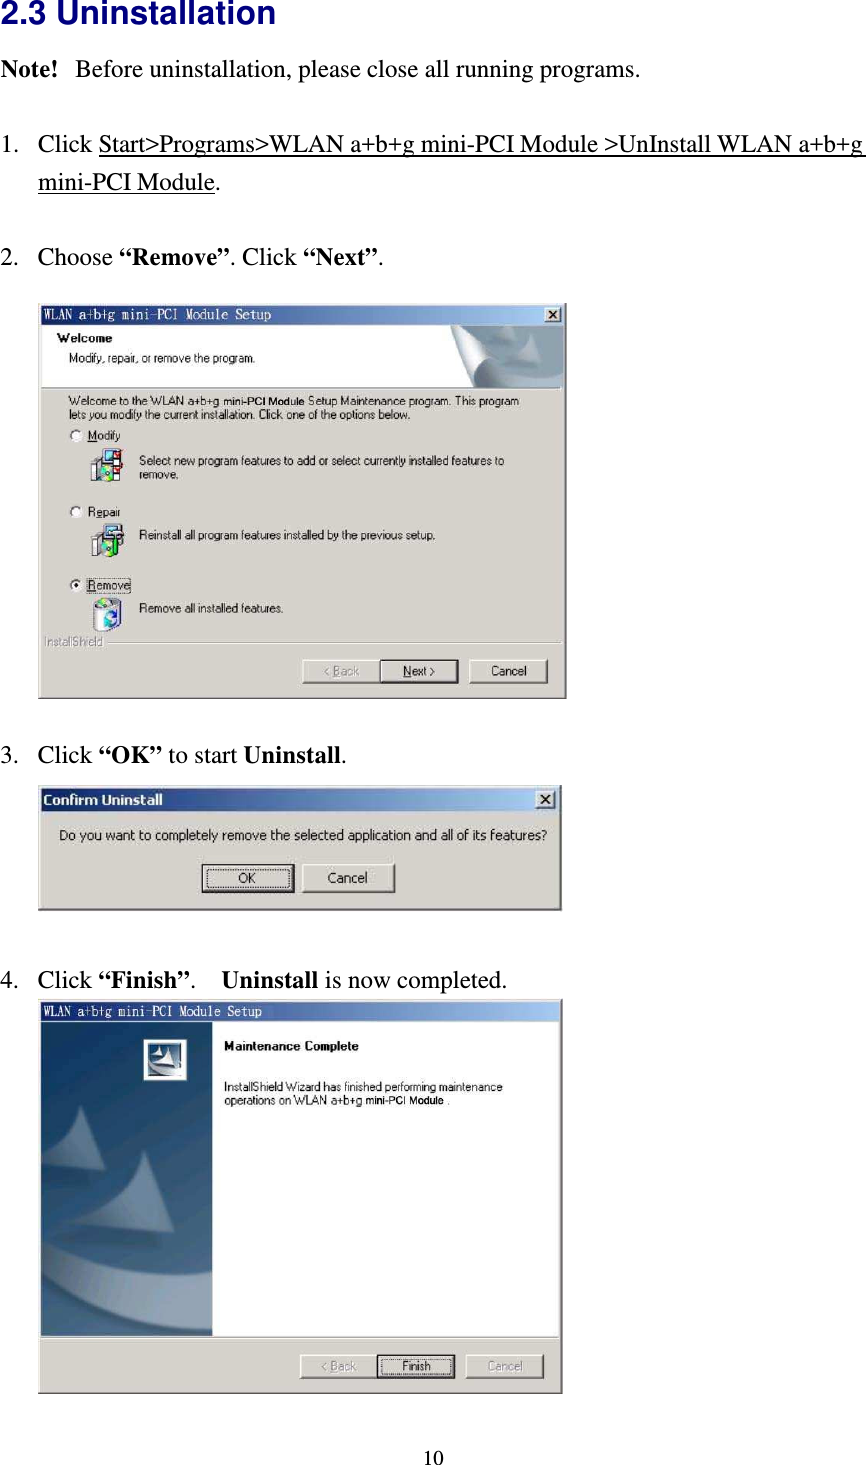   102.3 Uninstallation Note!   Before uninstallation, please close all running programs.  1. Click Start&gt;Programs&gt;WLAN a+b+g mini-PCI Module &gt;UnInstall WLAN a+b+g mini-PCI Module.  2. Choose “Remove”. Click “Next”.    3. Click “OK” to start Uninstall.   4. Click “Finish”.    Uninstall is now completed.   